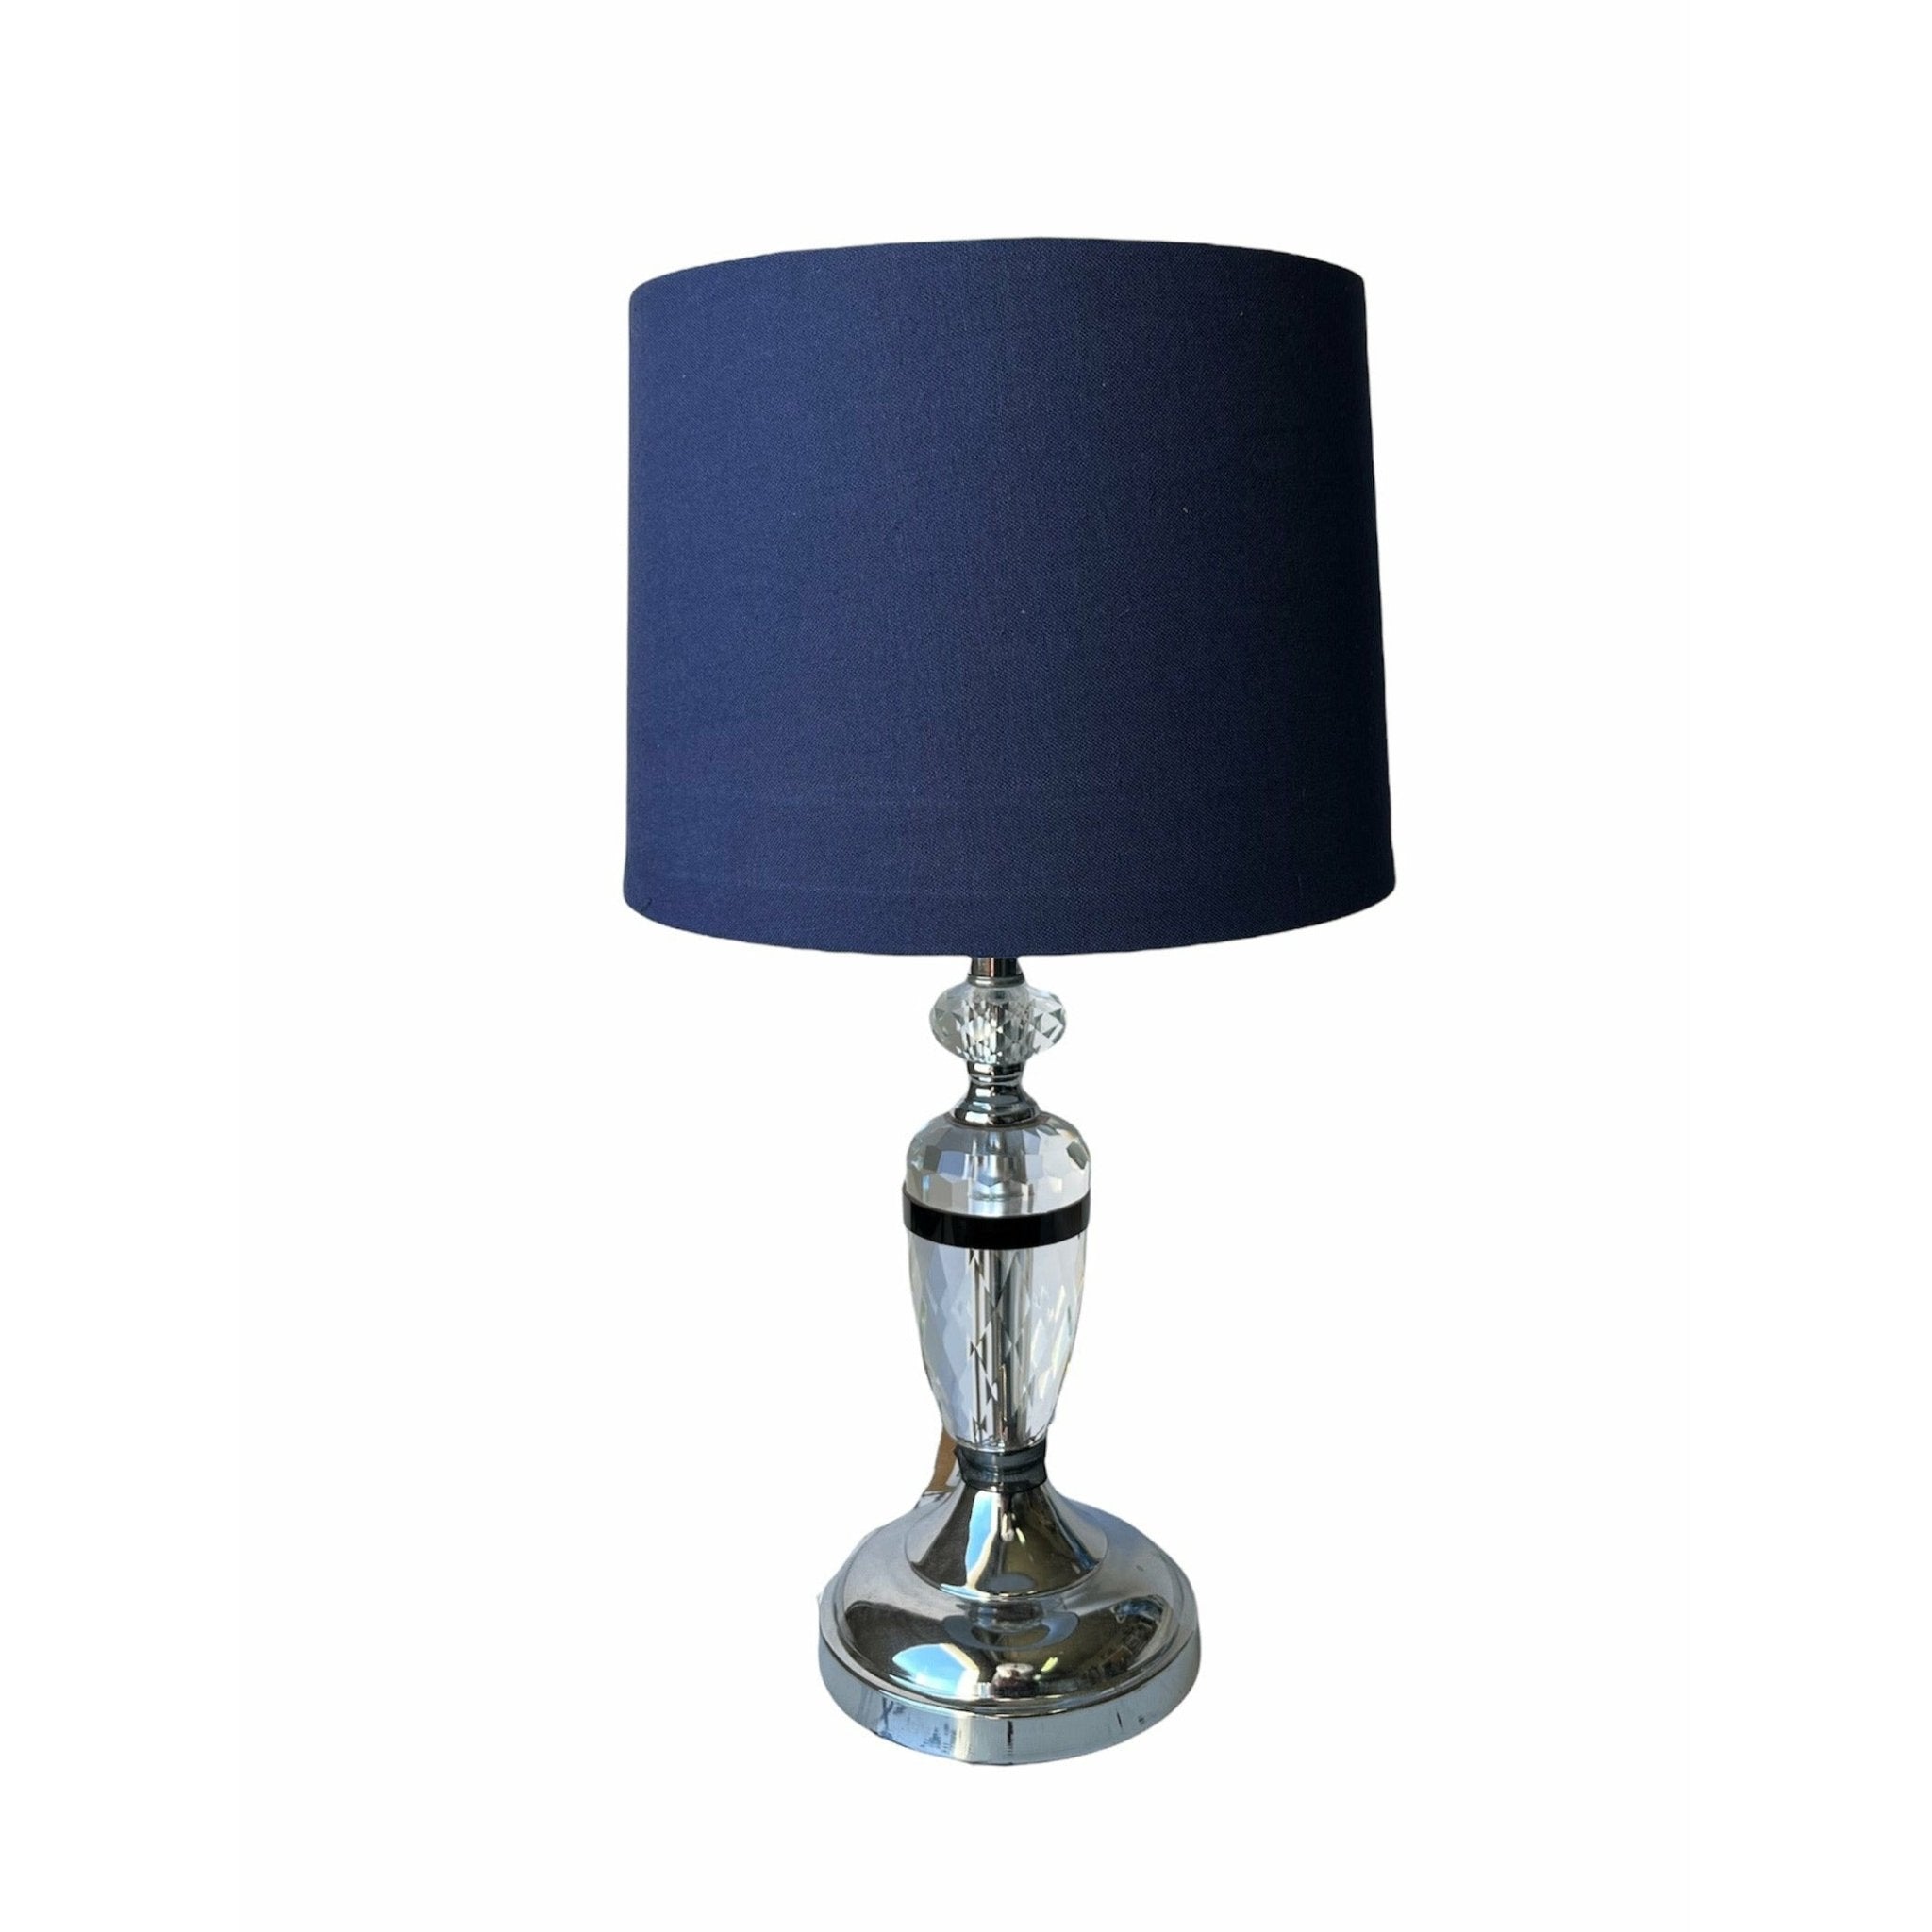 Glass Based Lamp With Navy Shade